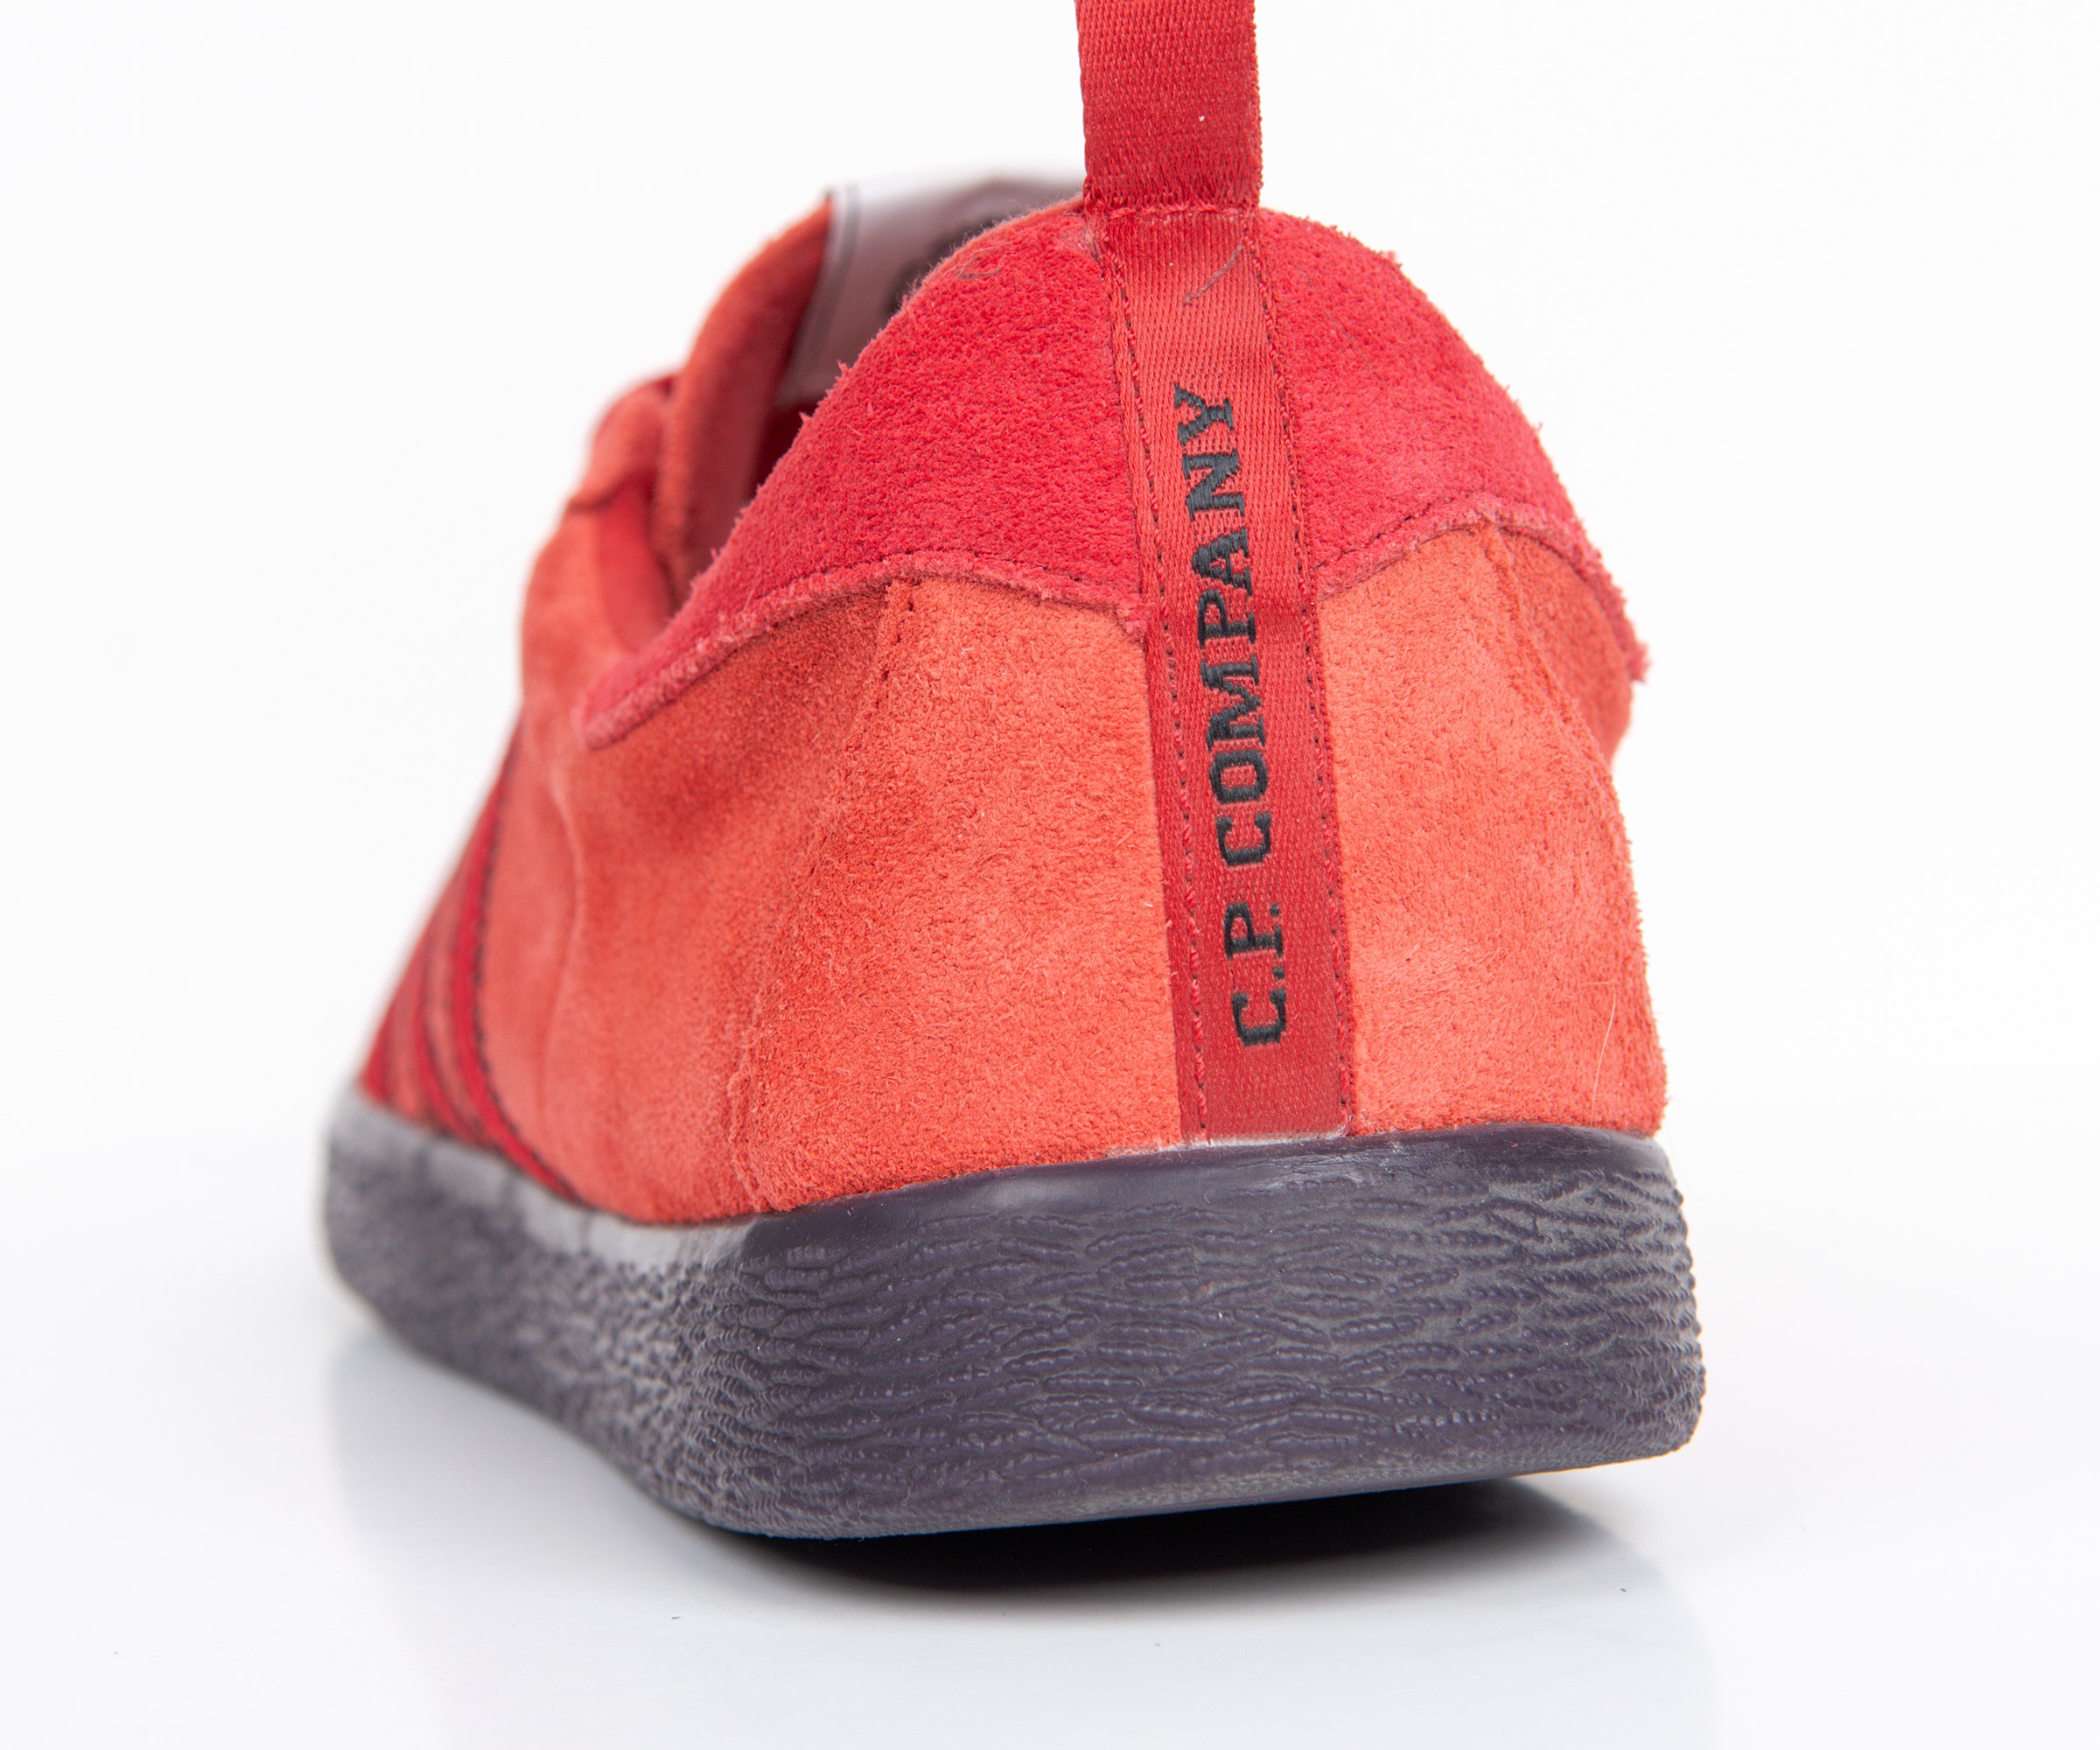 C.P. Company Archive x ADIDAS Tobacco Trainers - ST Brick/Night Red/Surf Red